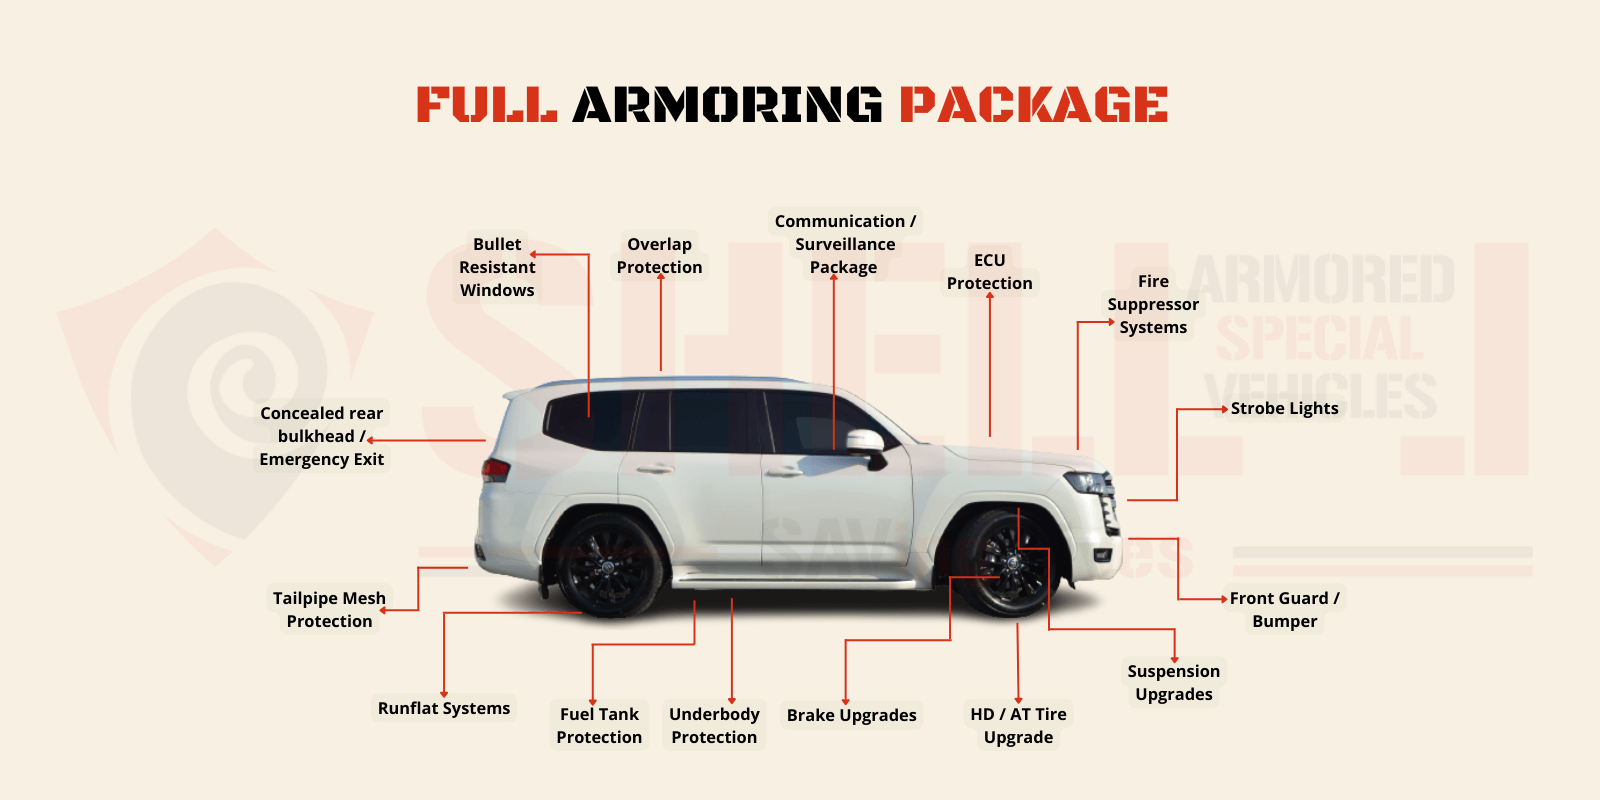 ARMORING PACKAGE FULL